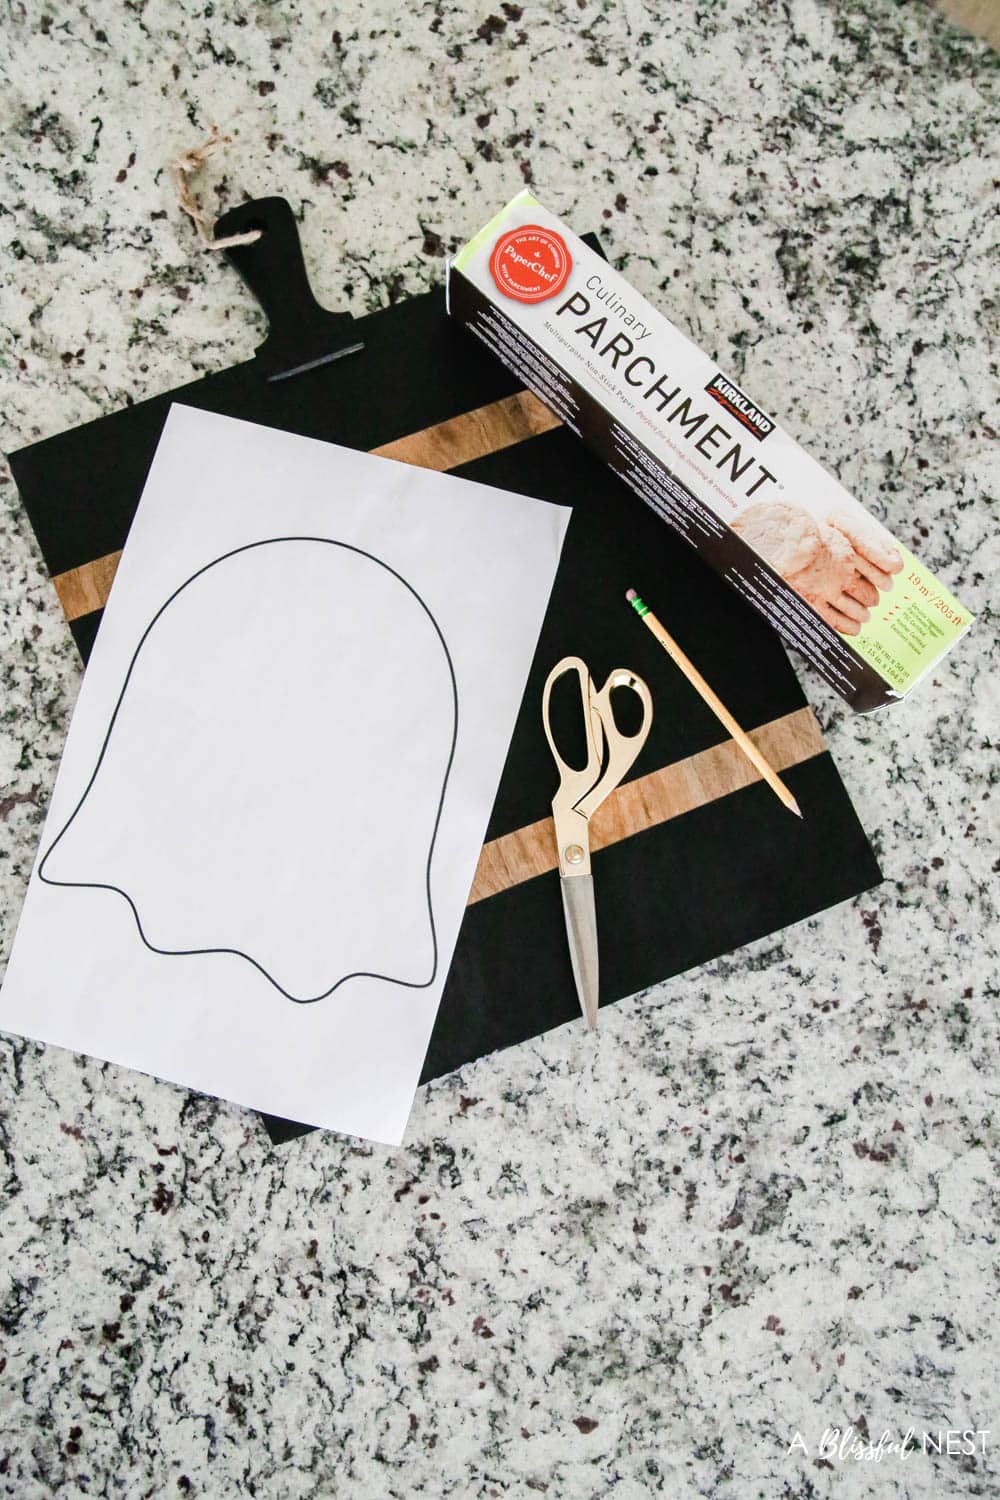 Black cutting board, ghost outline on paper to cut out, scissors, and parchment paper